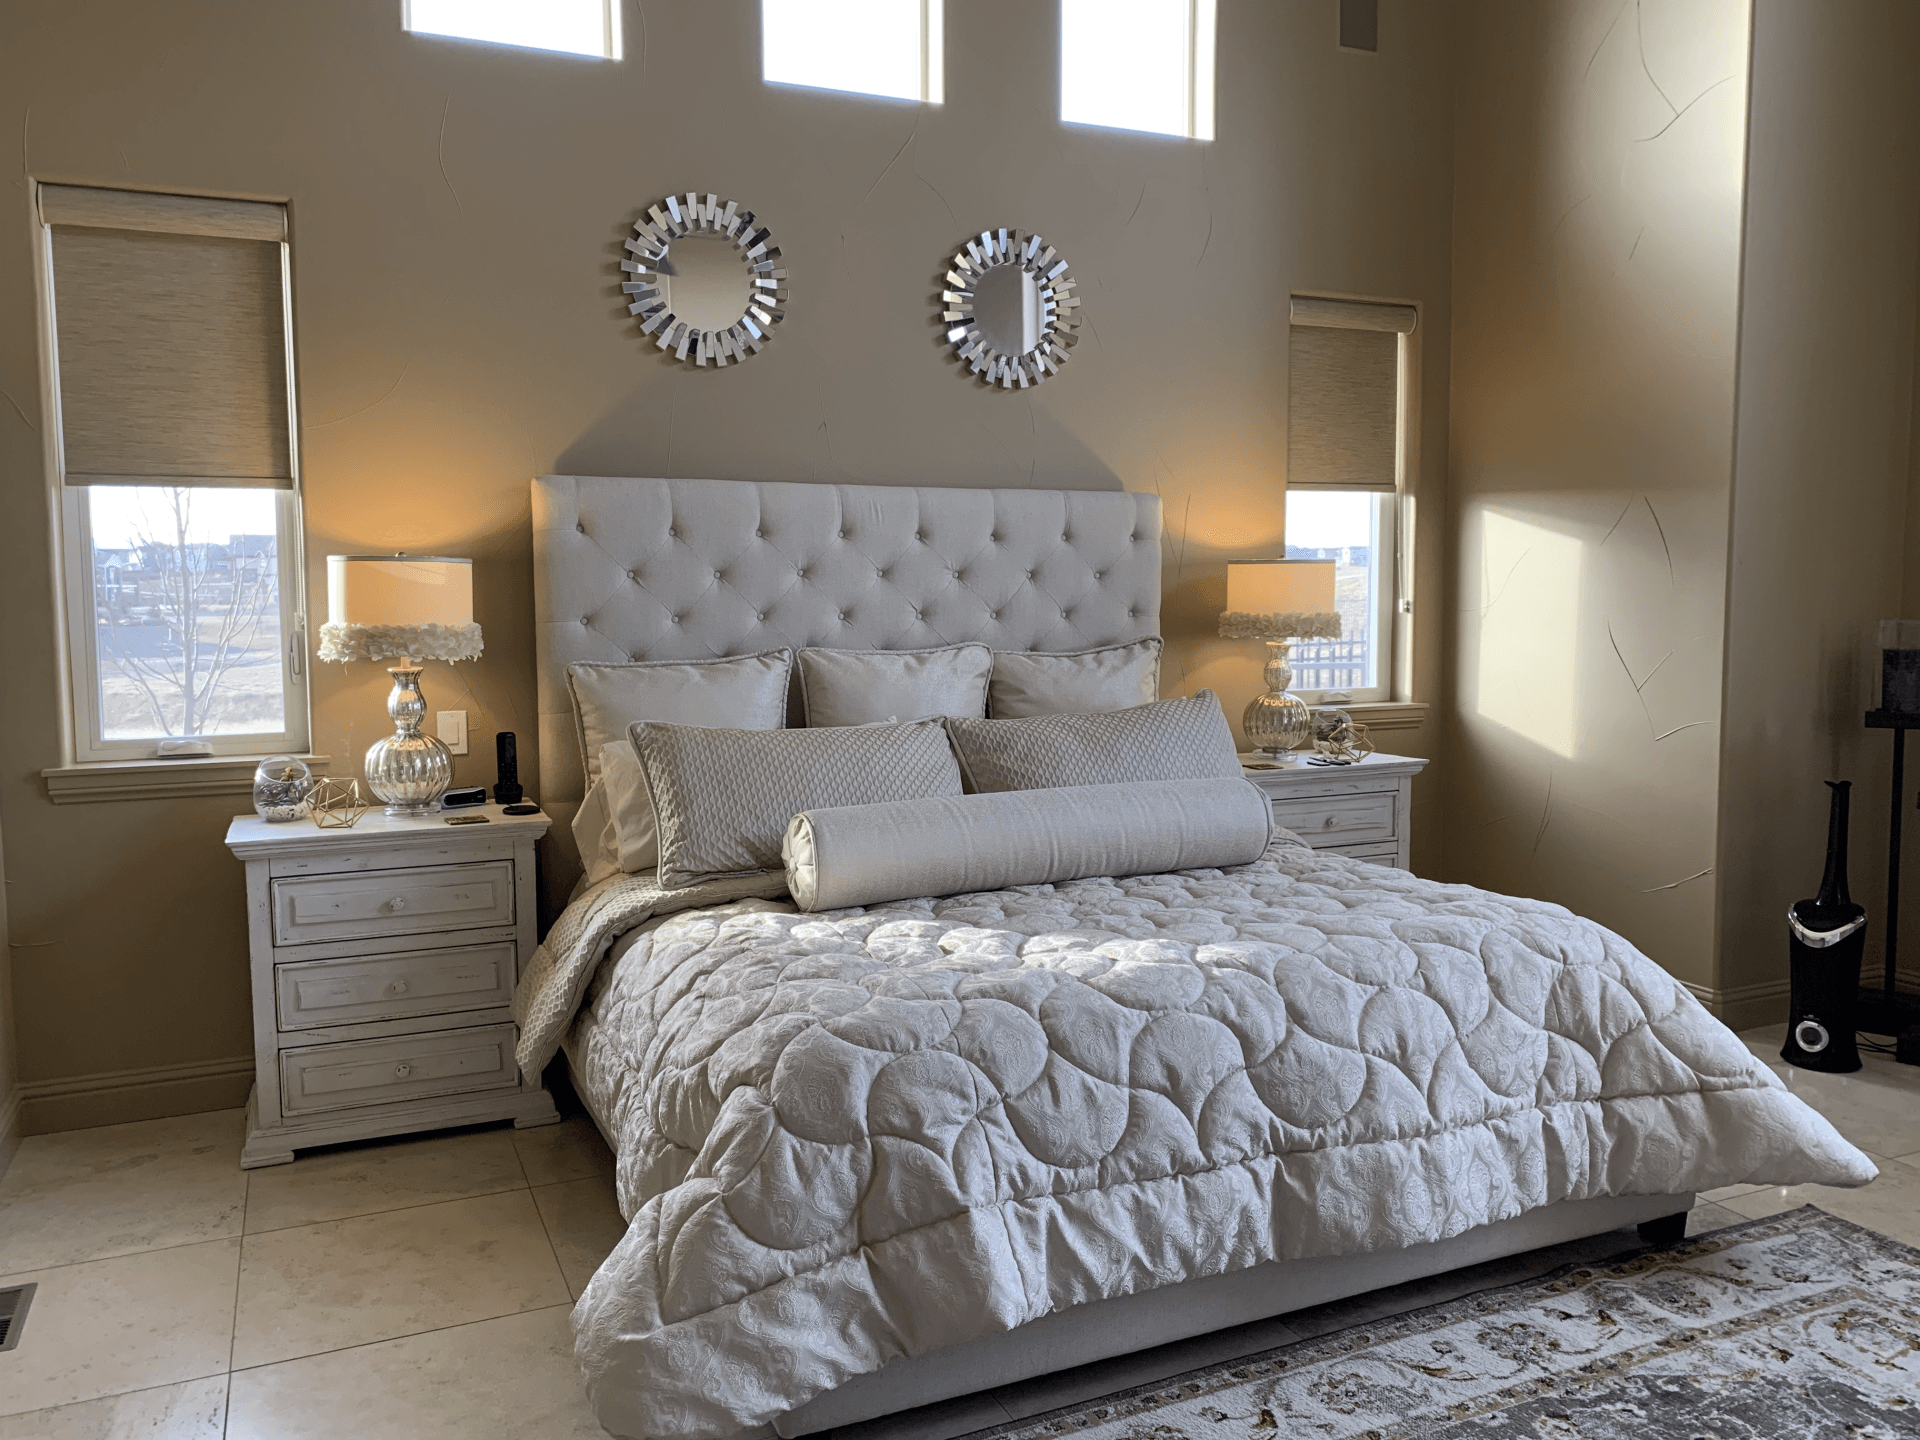 Taupe, white, and silver bedroom with tile floor and area rug